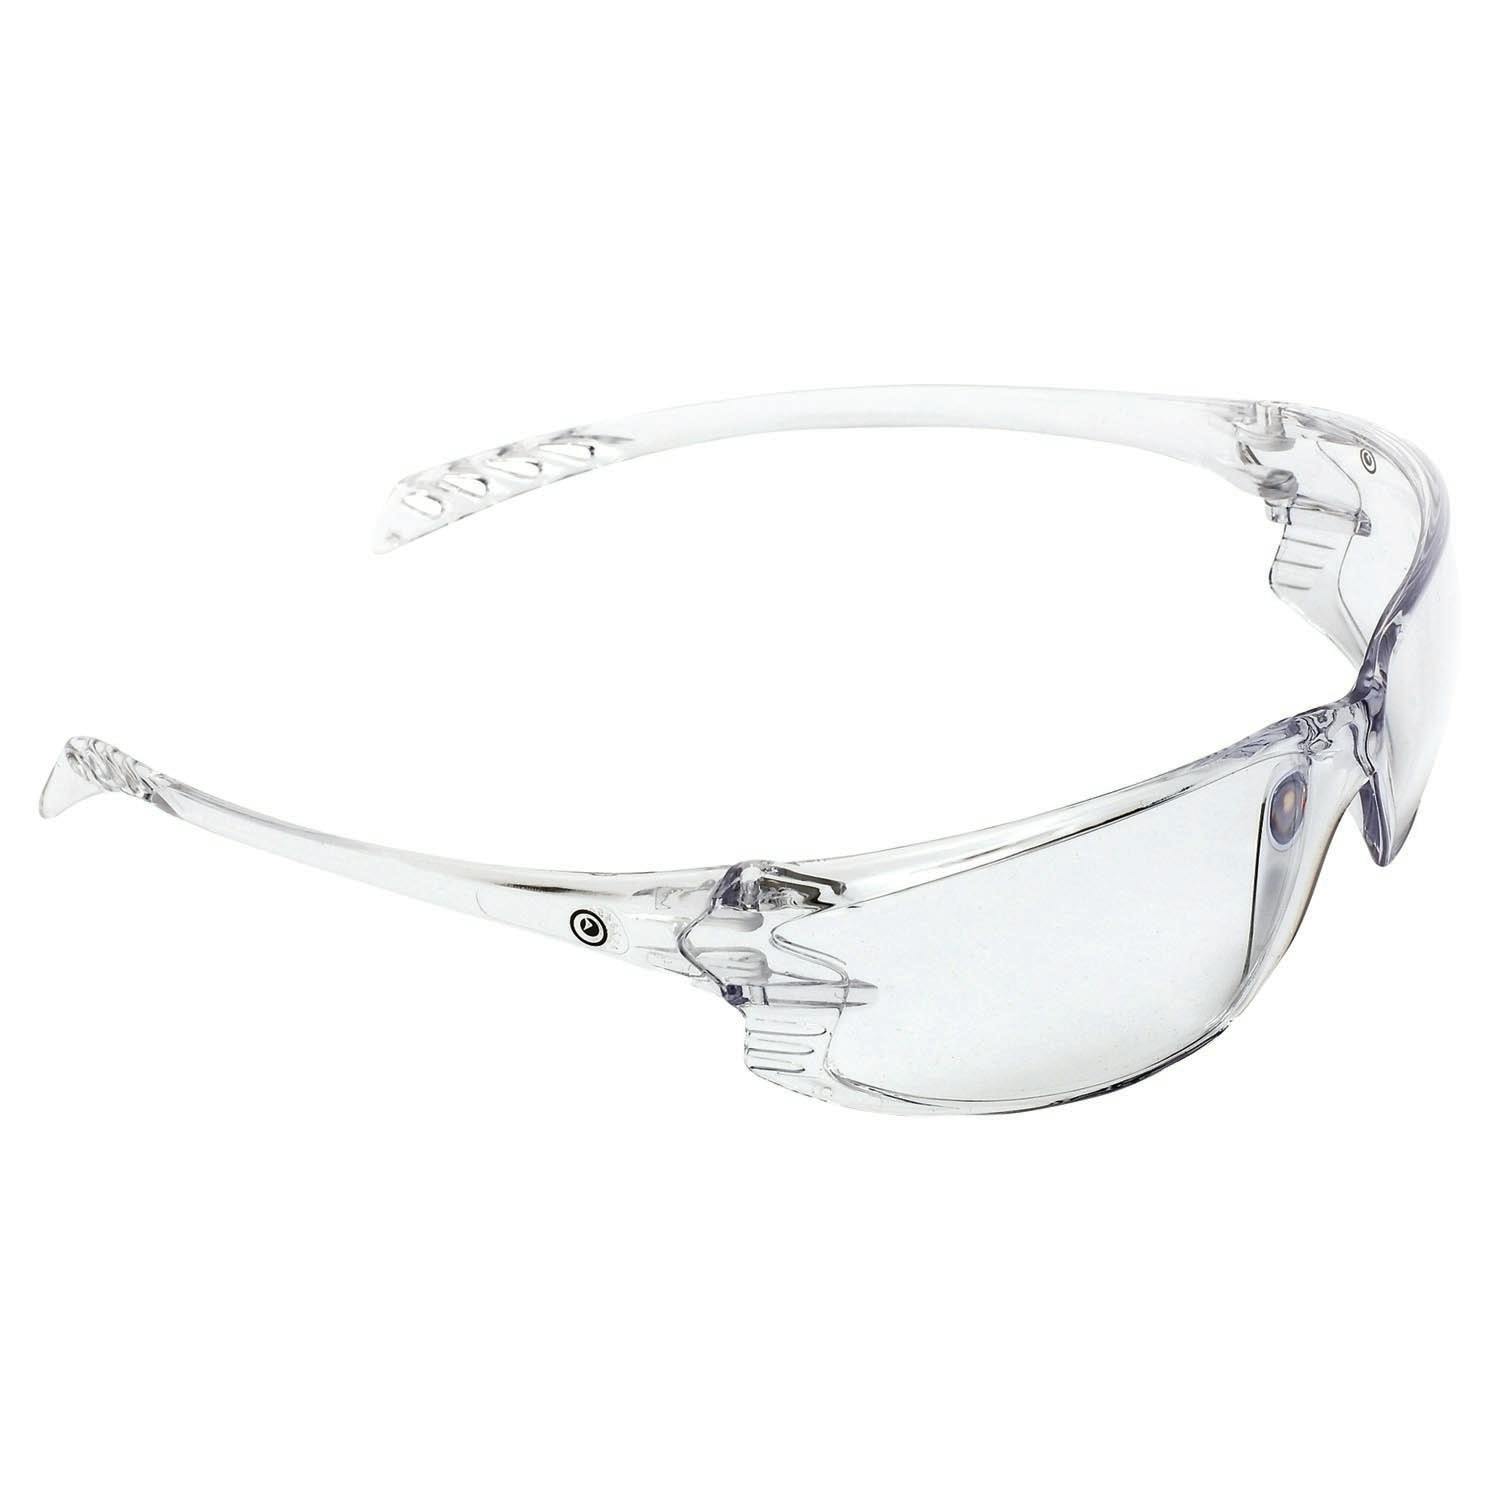 Pro Choice 9900 Safety Glasses Clear Lens